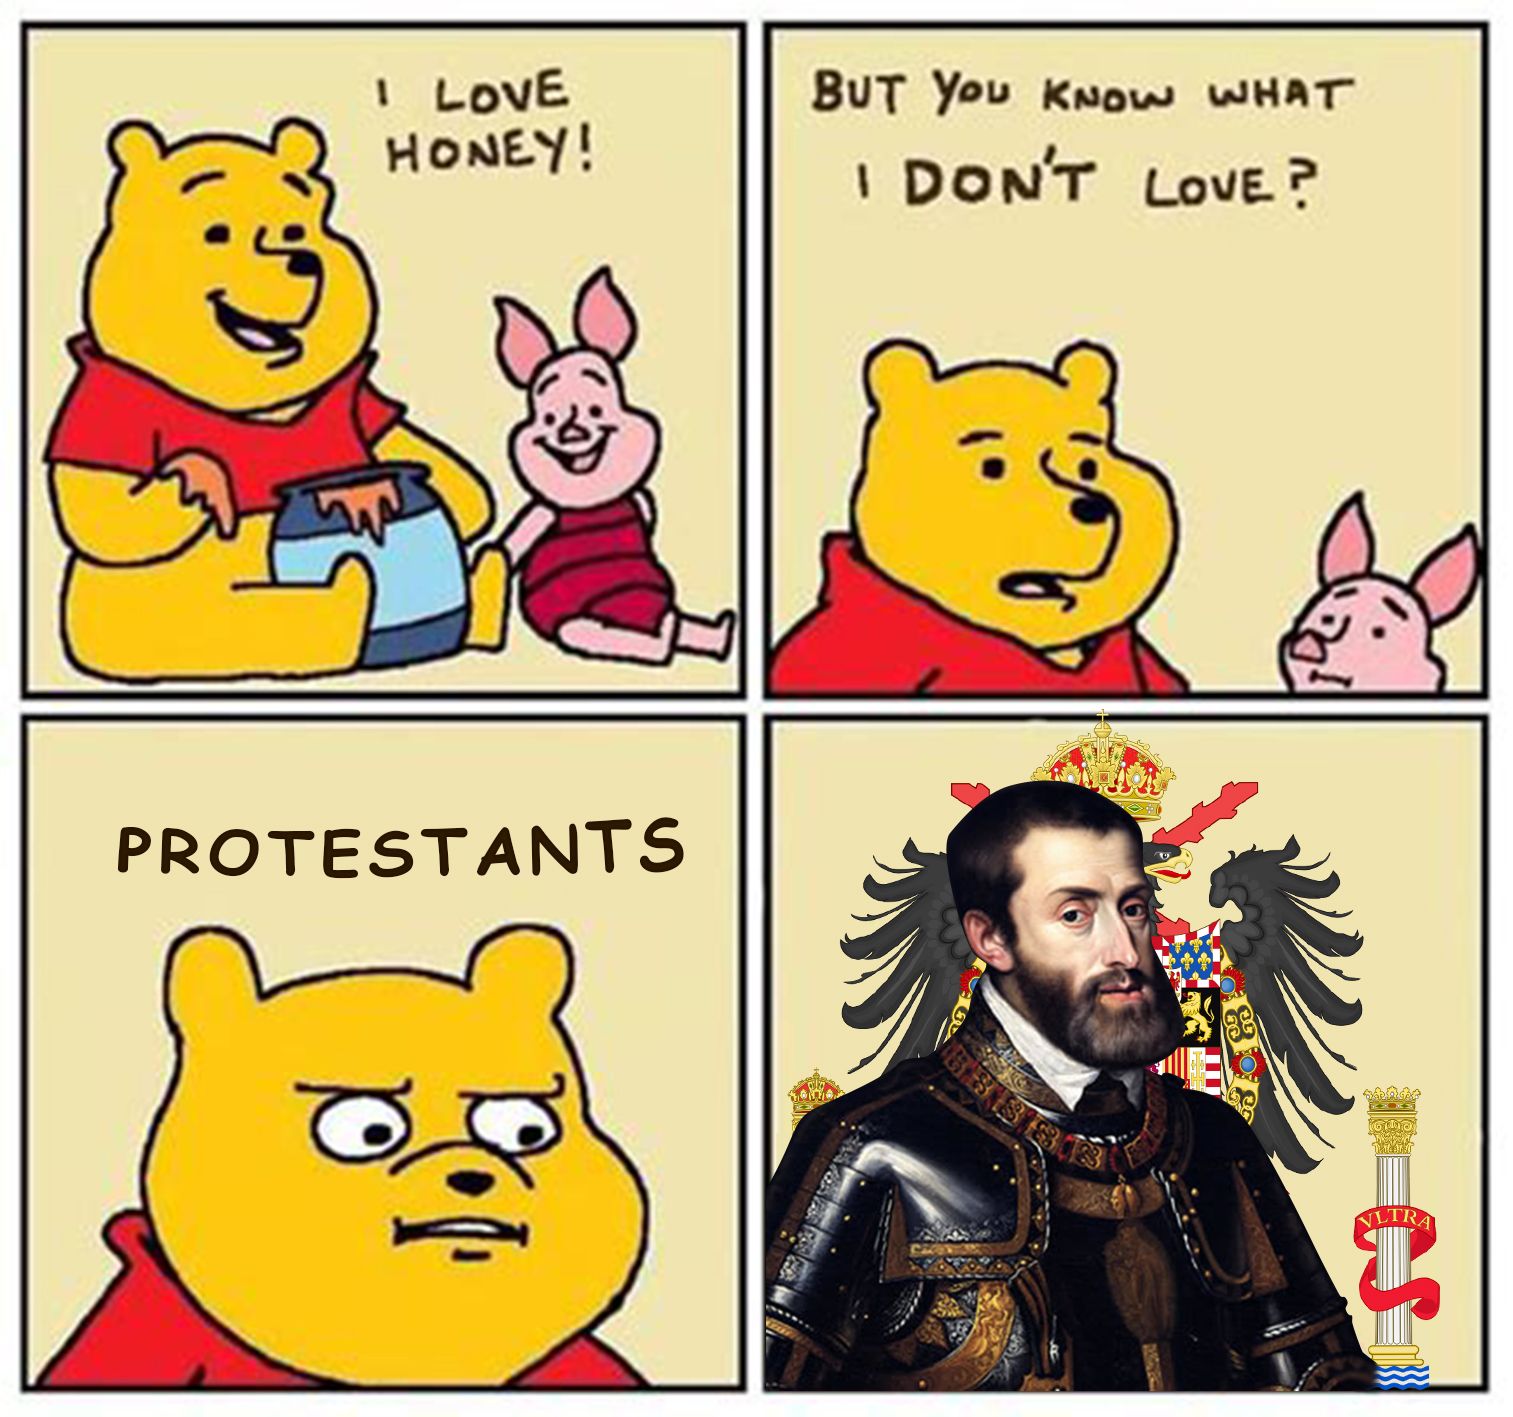 Needless to say, the Dutch weren't the biggest fans of Charles V